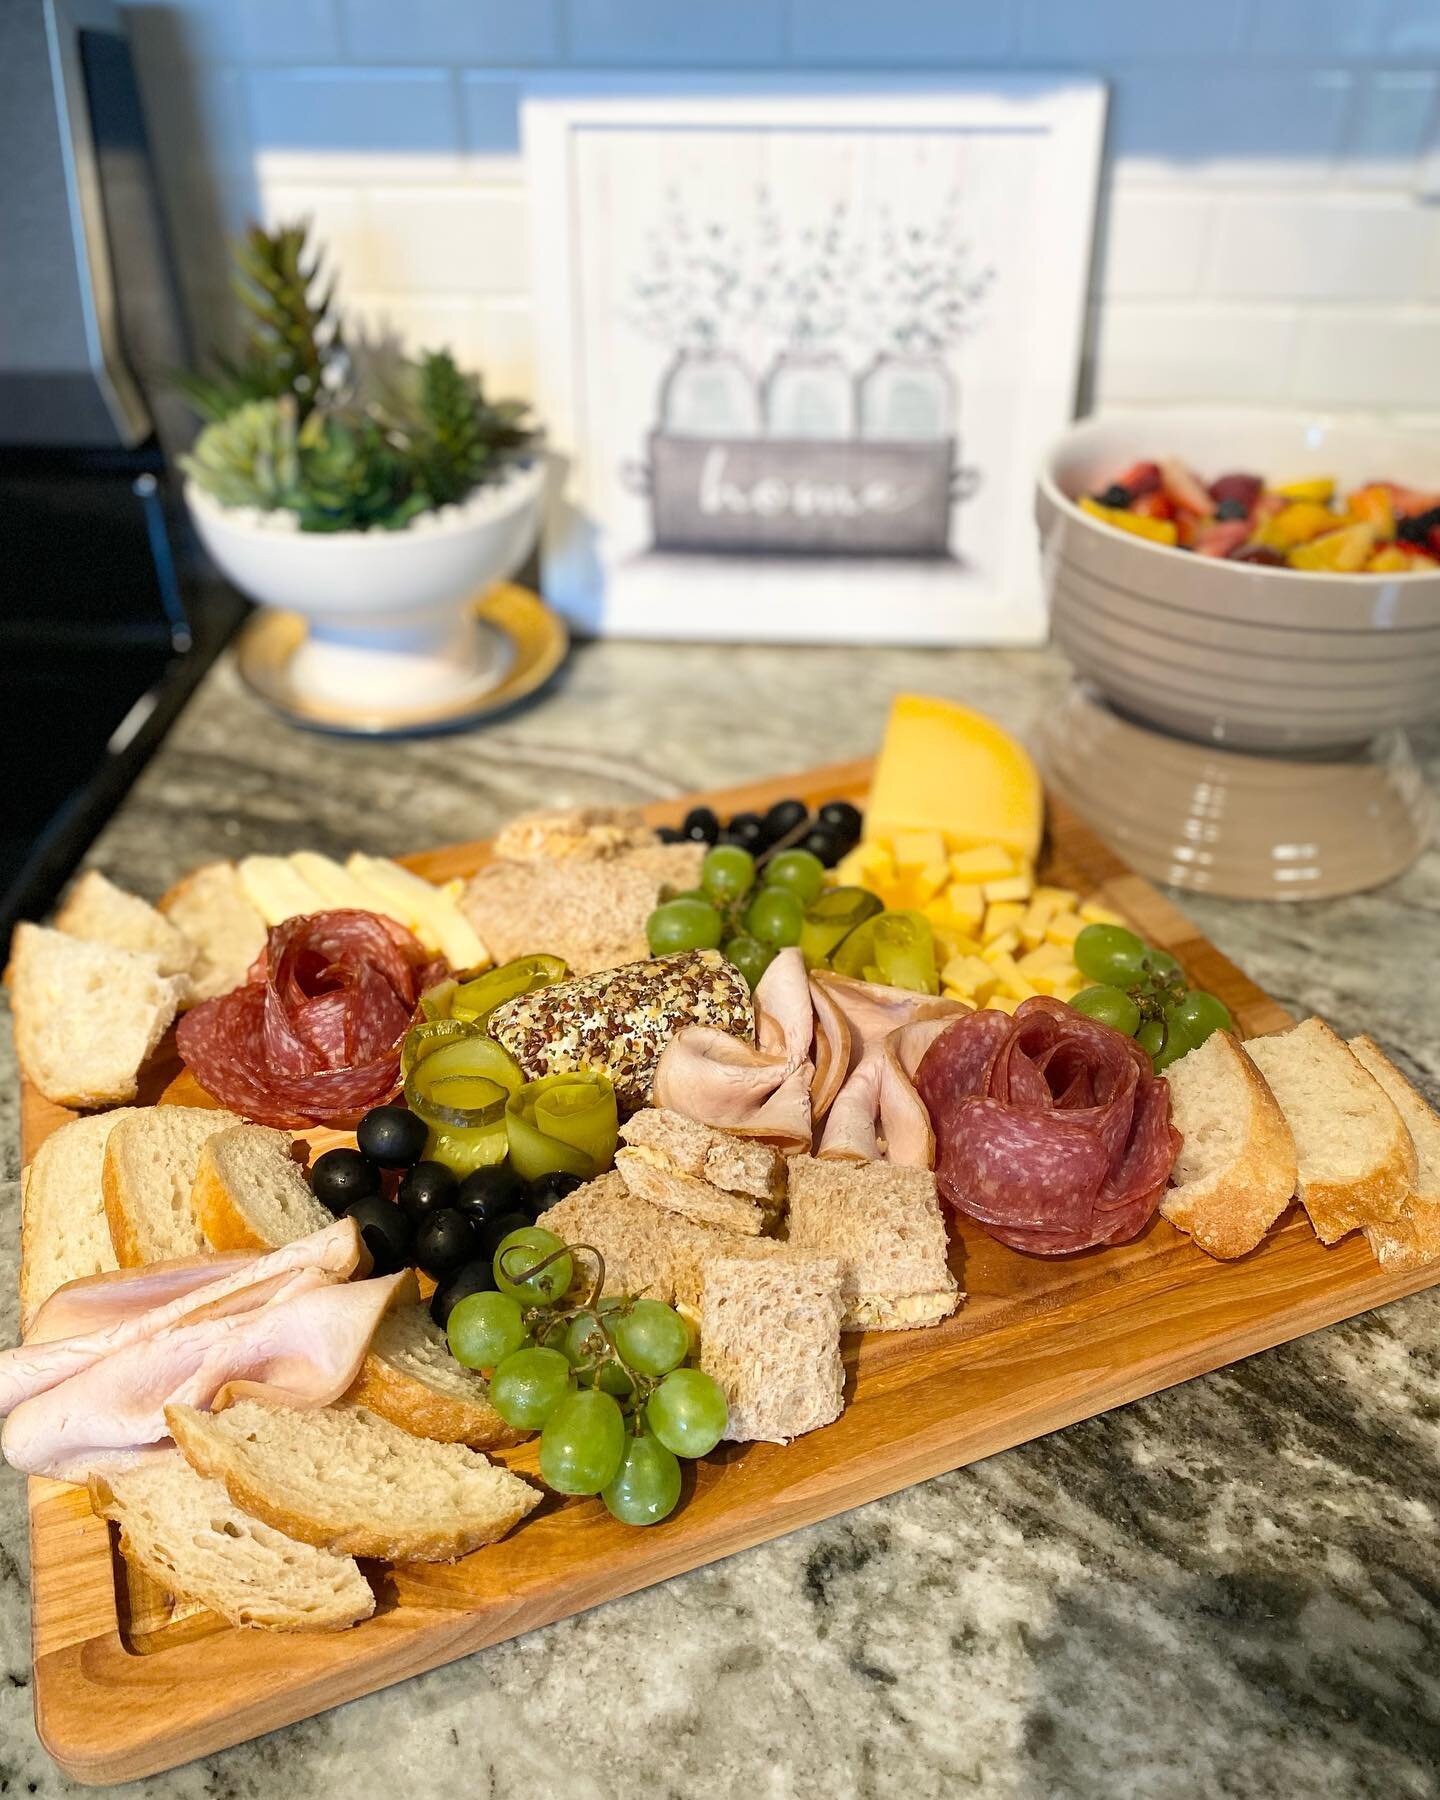 The first charcuterie board I can actually eat in 9 months 🍇🧀 ⁣
⁣
Thanks Mom &amp; Dad! #spoiledbrat 🤪